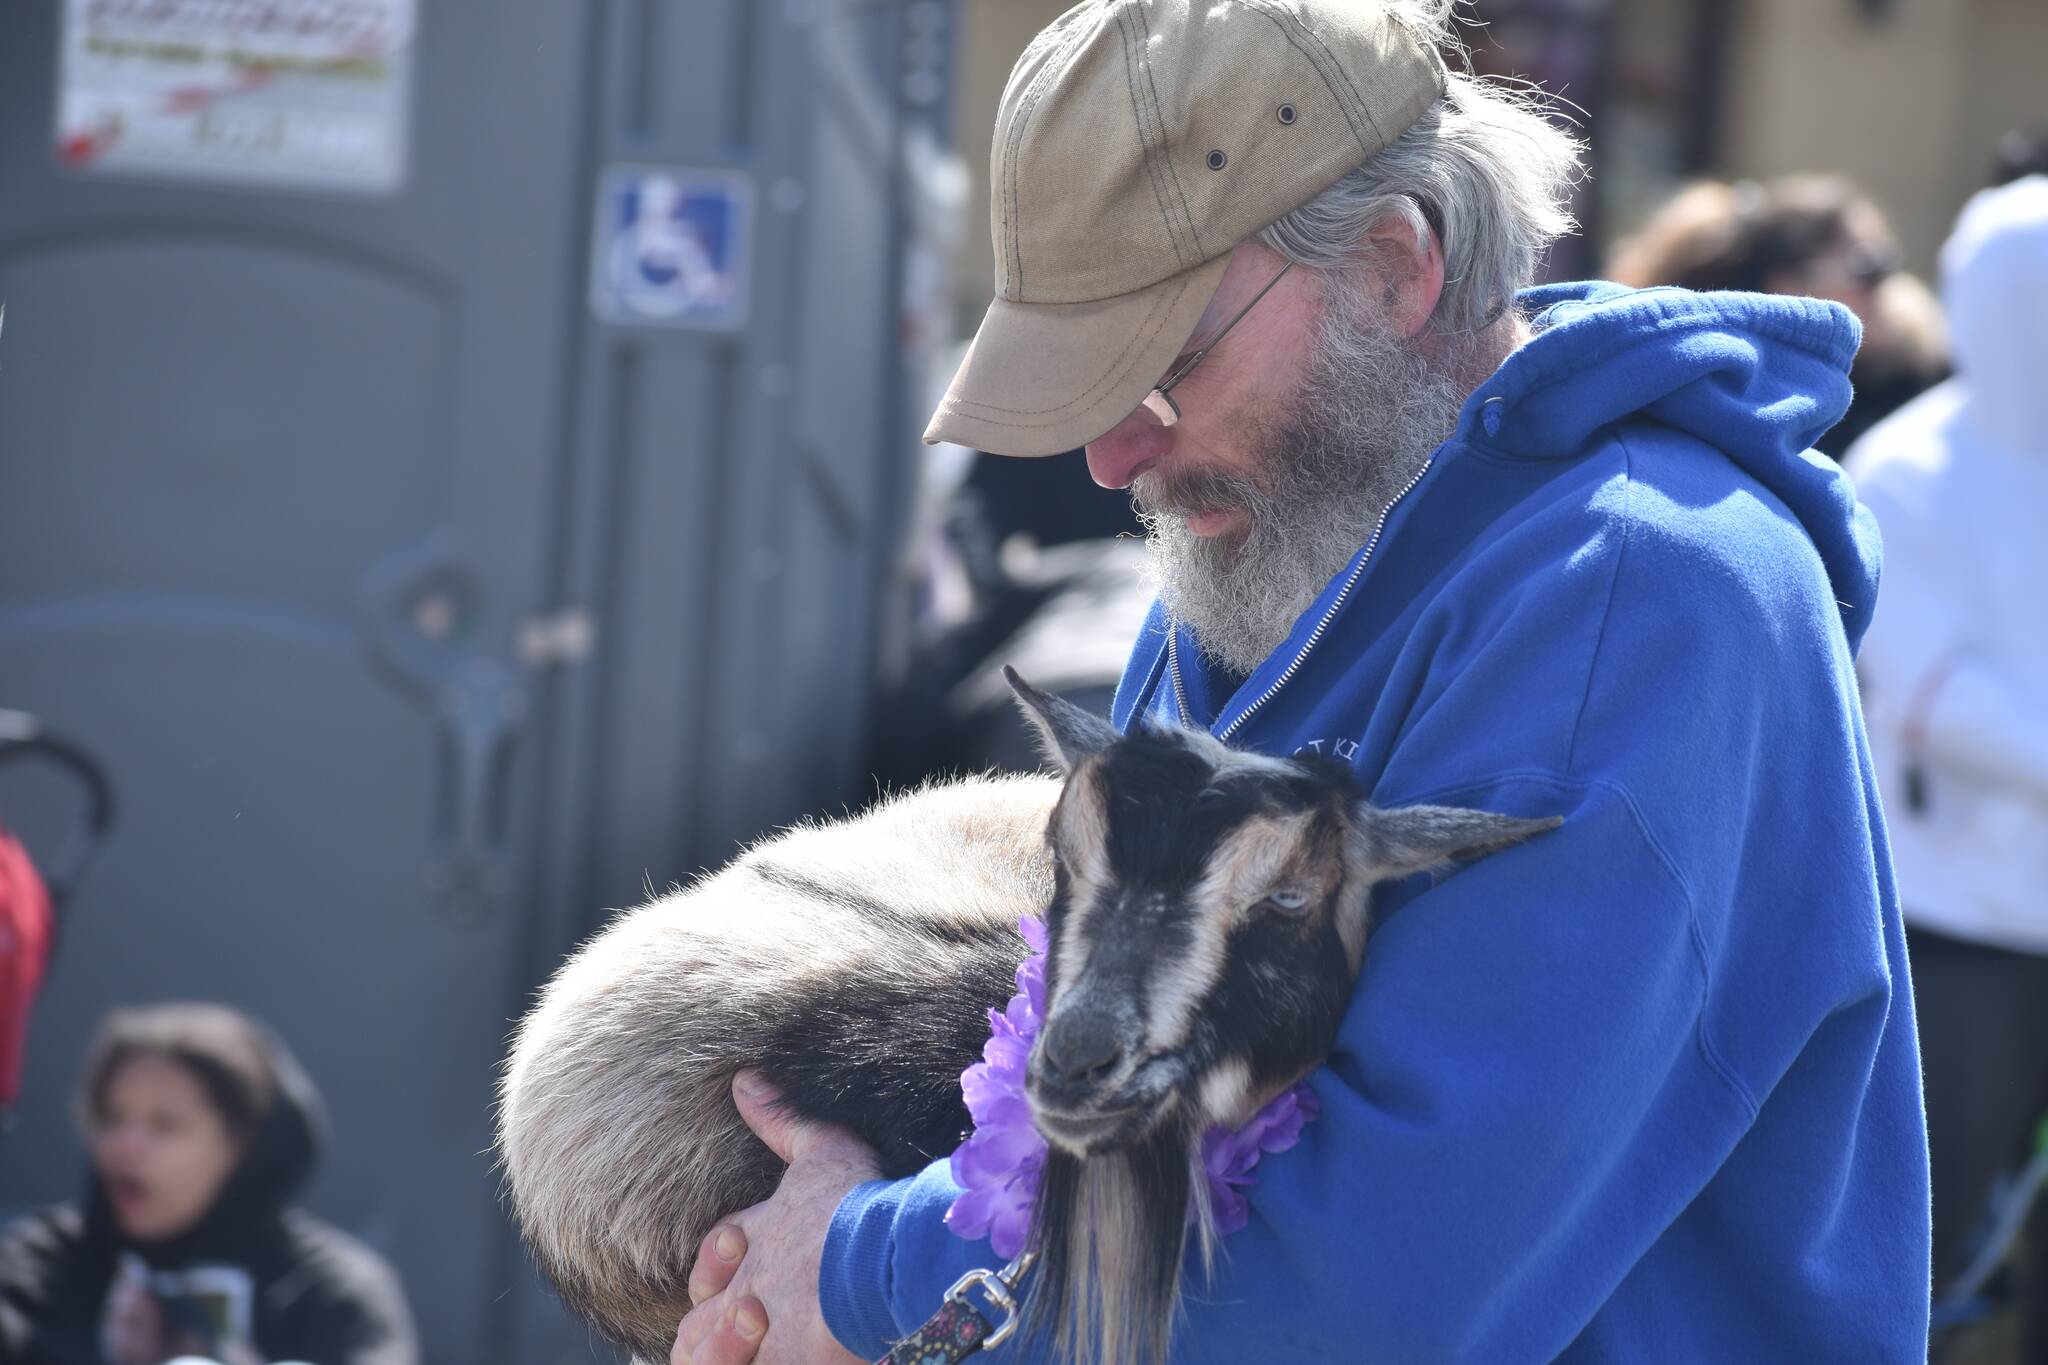 A man cradles a goat during the Daffodil Parade in Puyallup. Photo by Alex Bruell